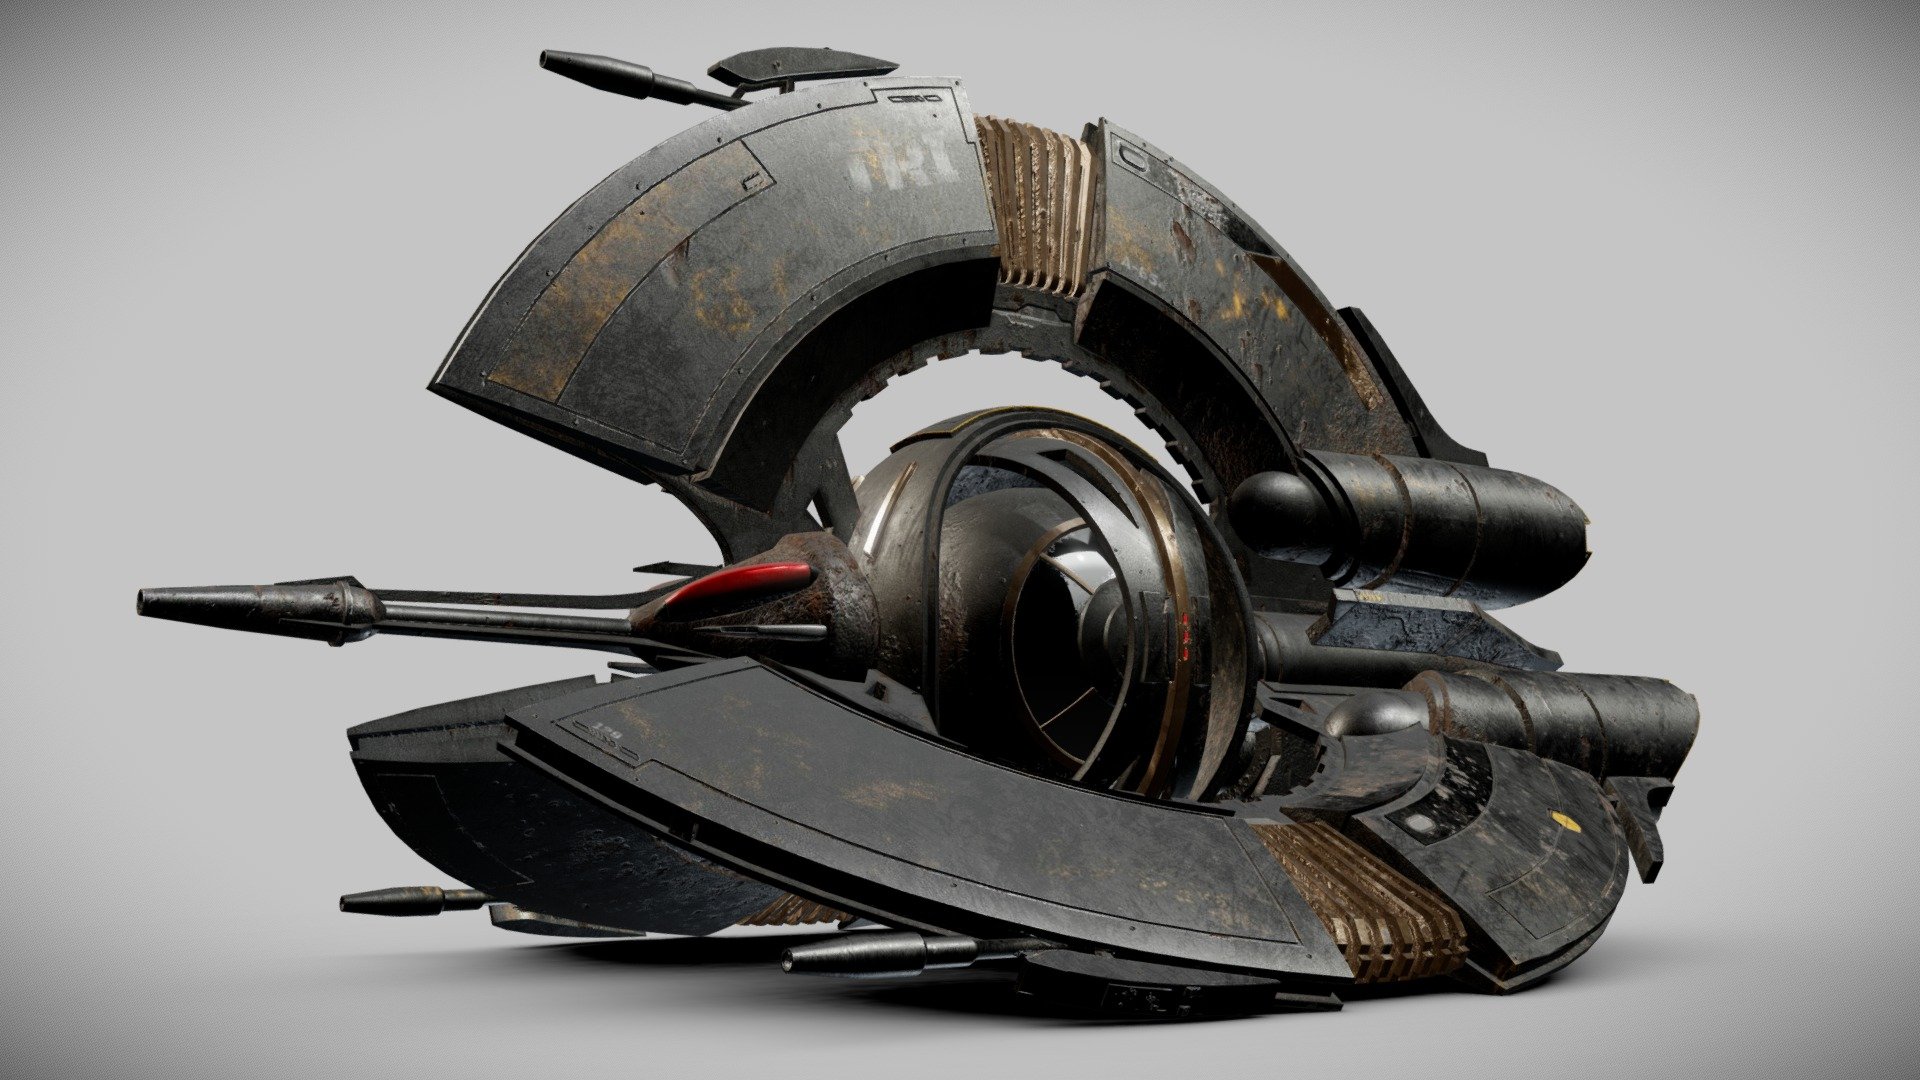 Based on the Droid Tri Fighter spacecraft from Starwars.
I modeled it in Maya and textured in Substance Painter 3d model